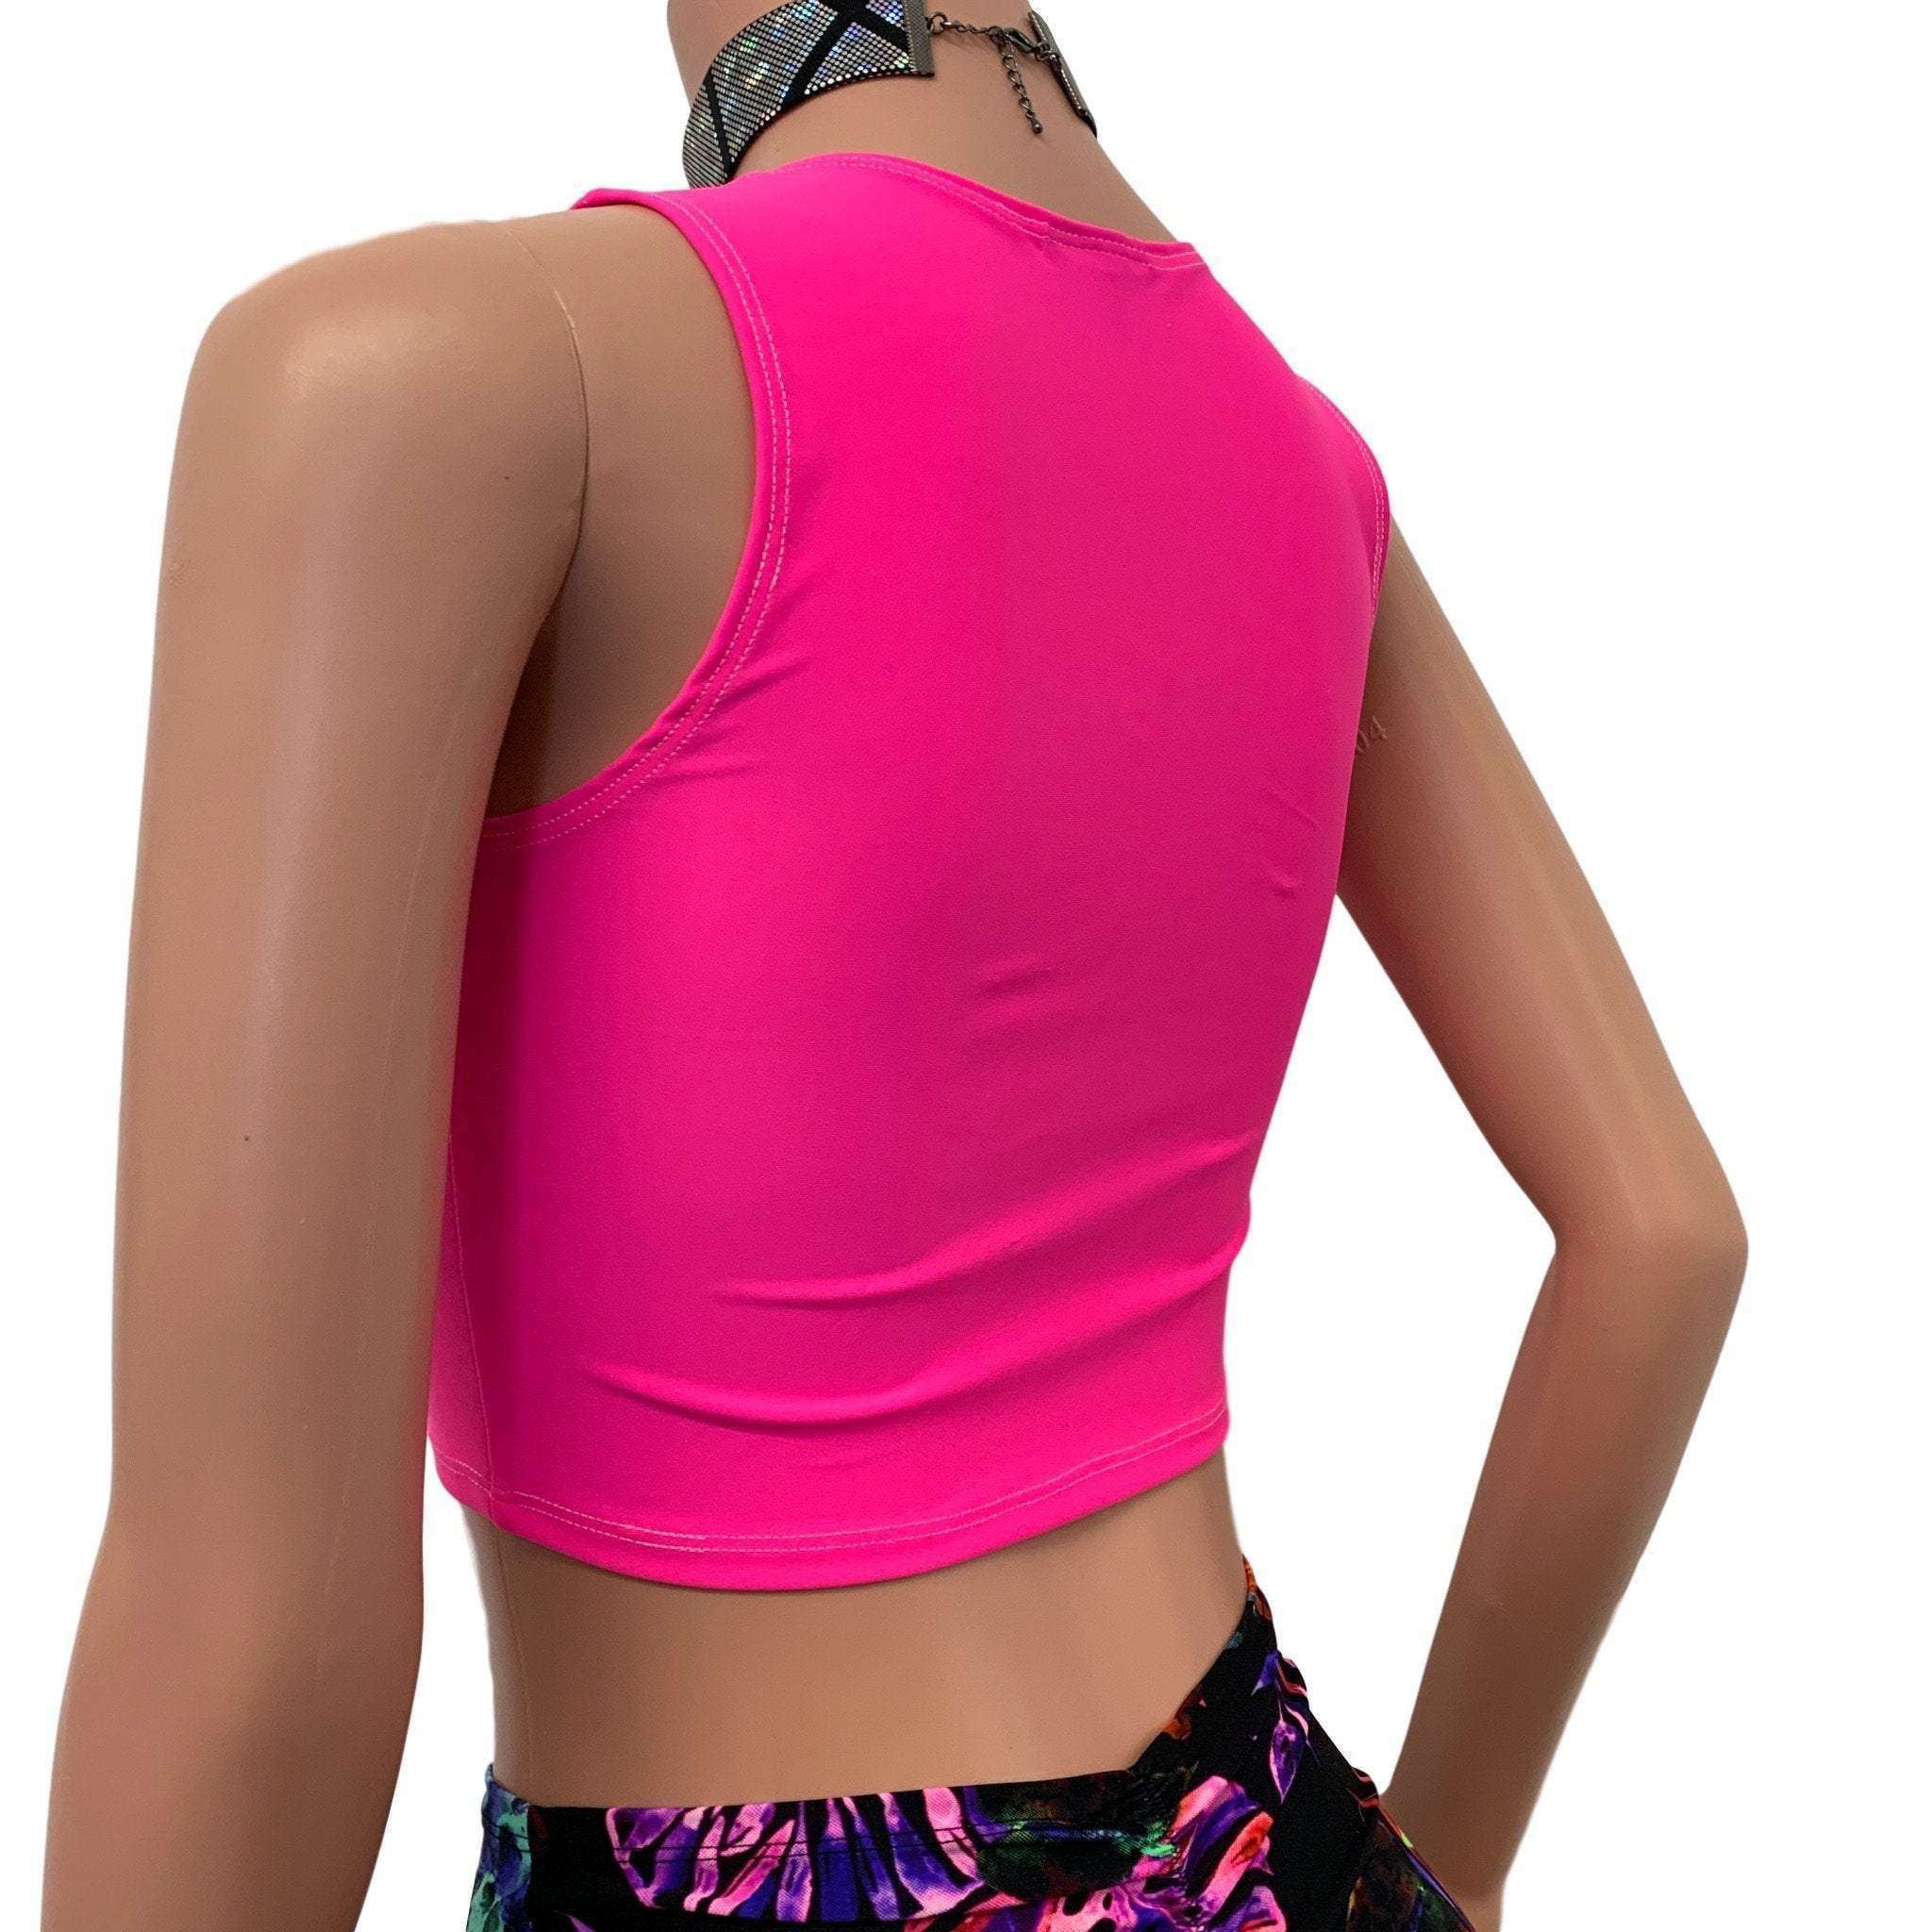 Neon Now Top  Pink tank tops outfit, Hot pink outfit, Hot pink tops